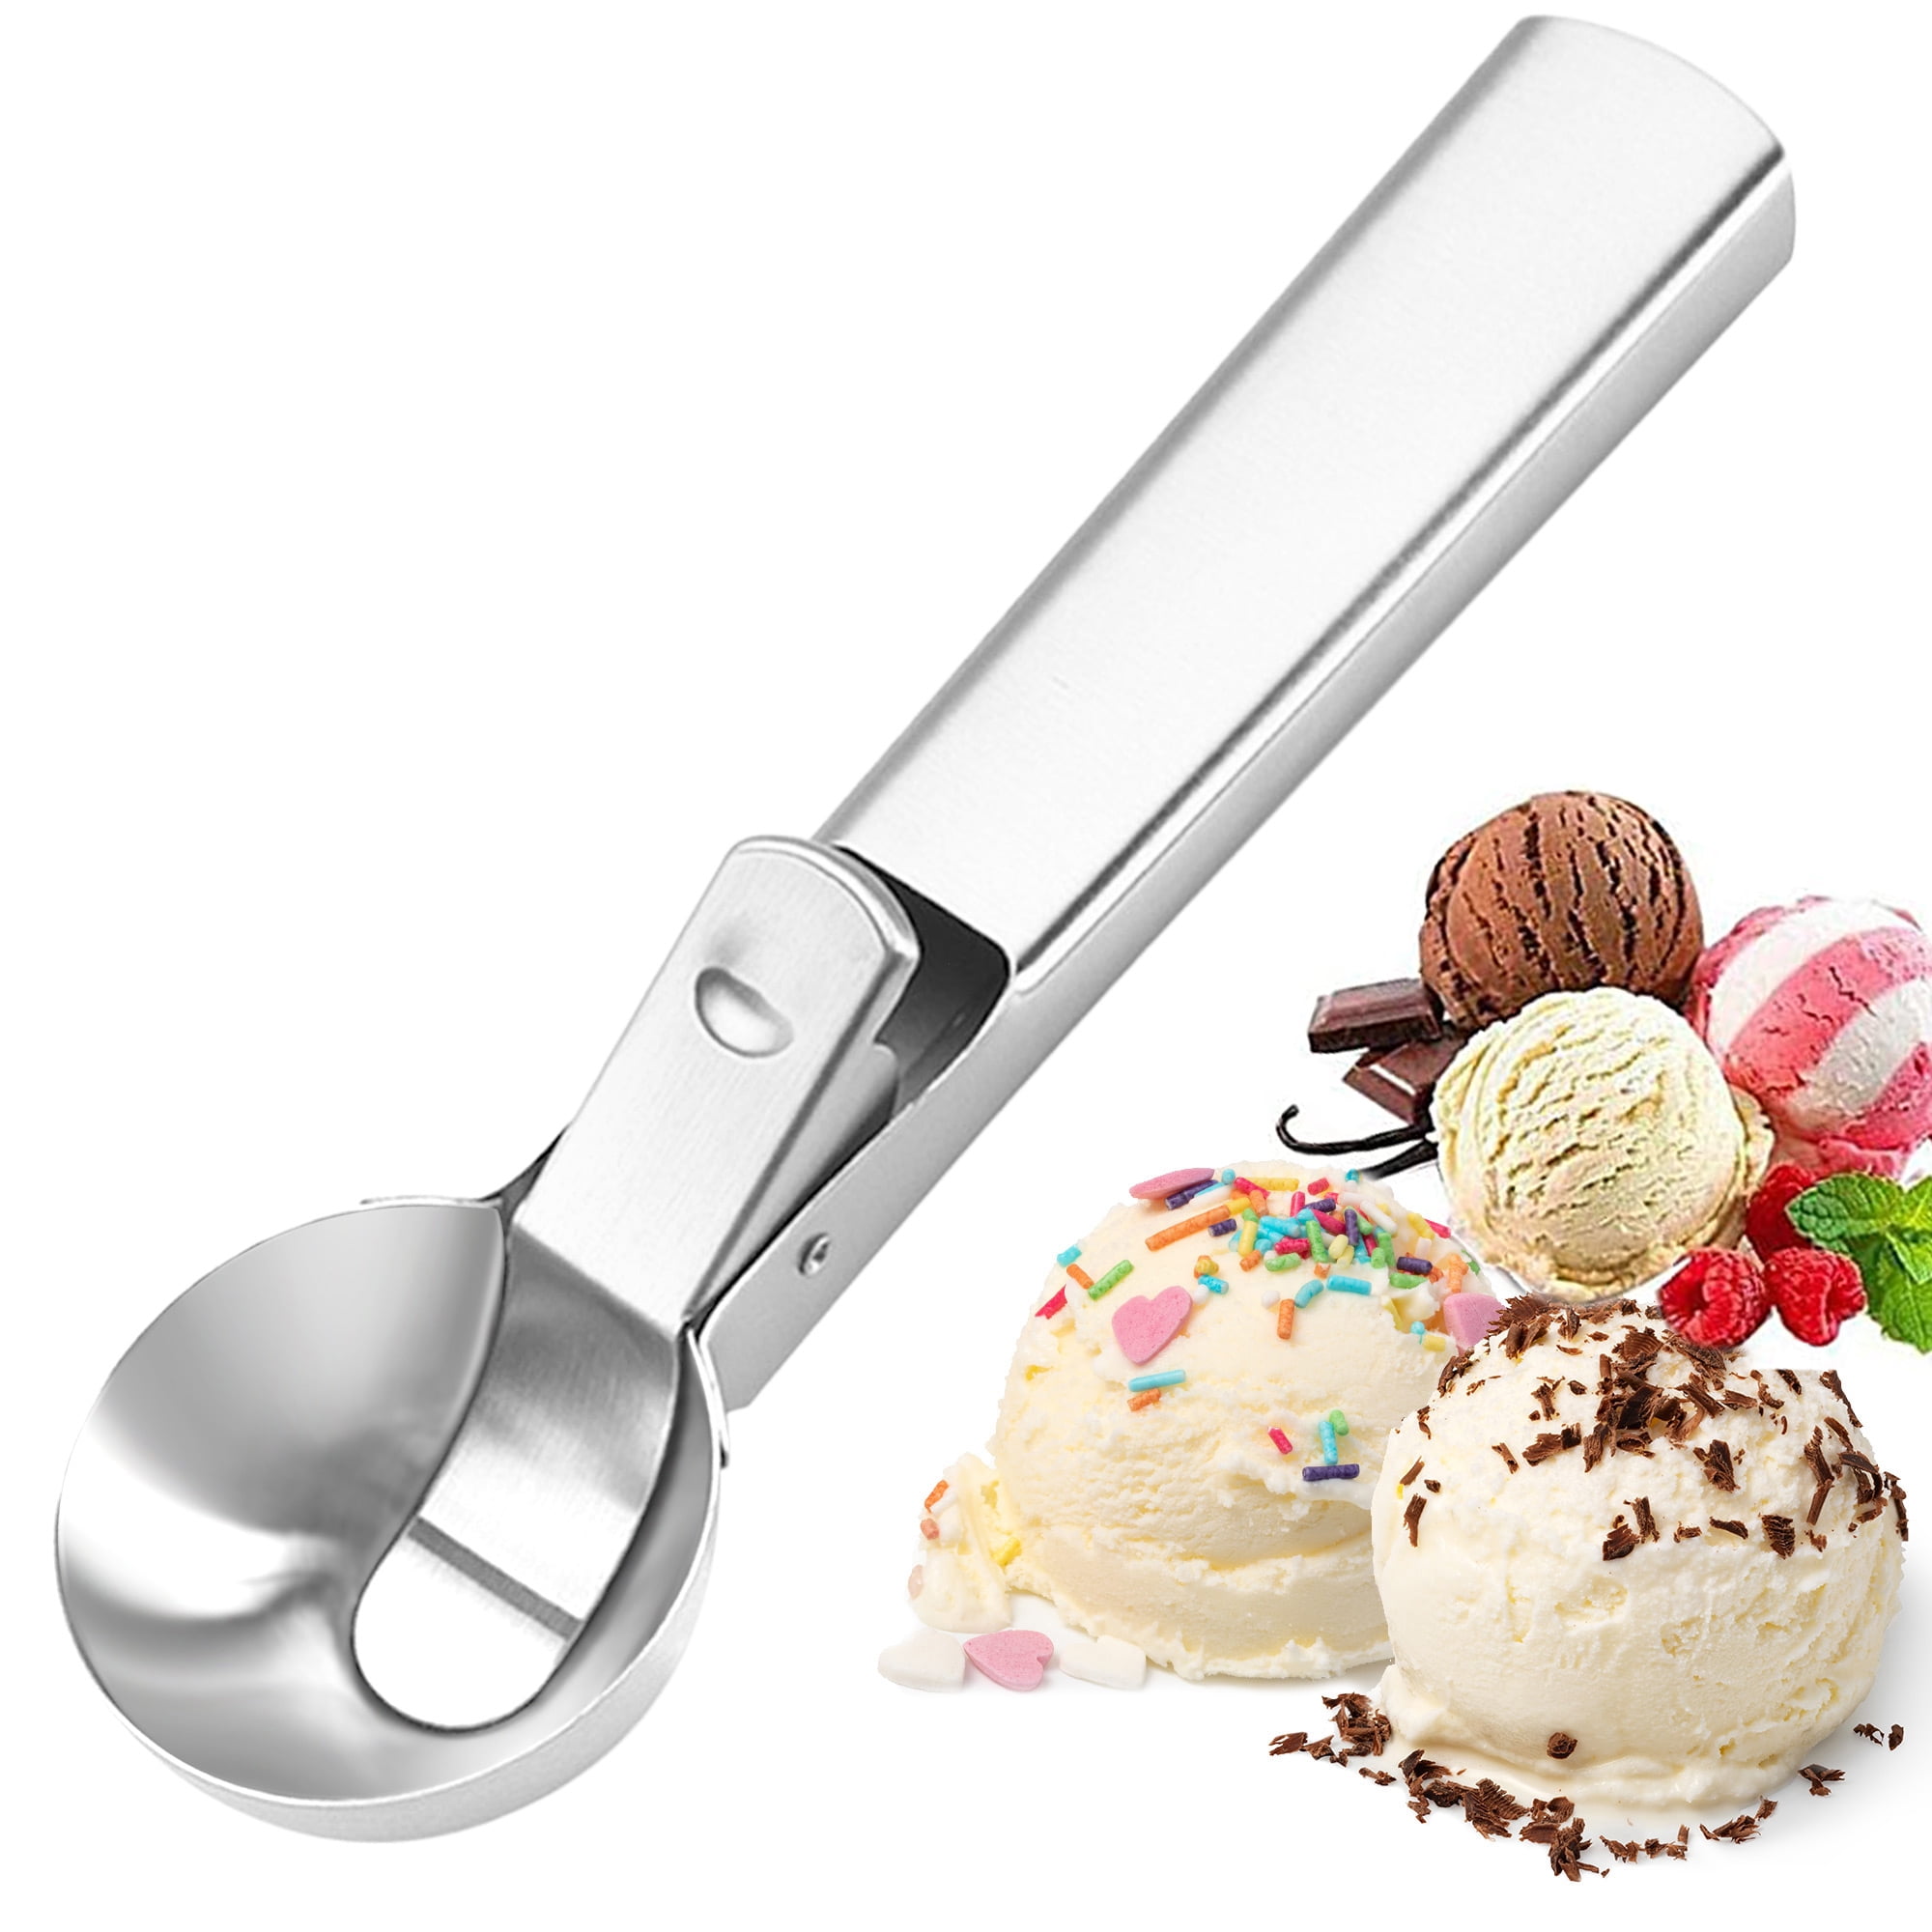  Gorilla Grip Stainless Steel Multipurpose BPA-Free Spring Scoop,  2 TBSP, for Melon, Cookie Dough, Ice Cream Scoops, Perfect Portion Sizes,  Easy Squeeze and Clean Release, Scooper Size 30, Black: Home 